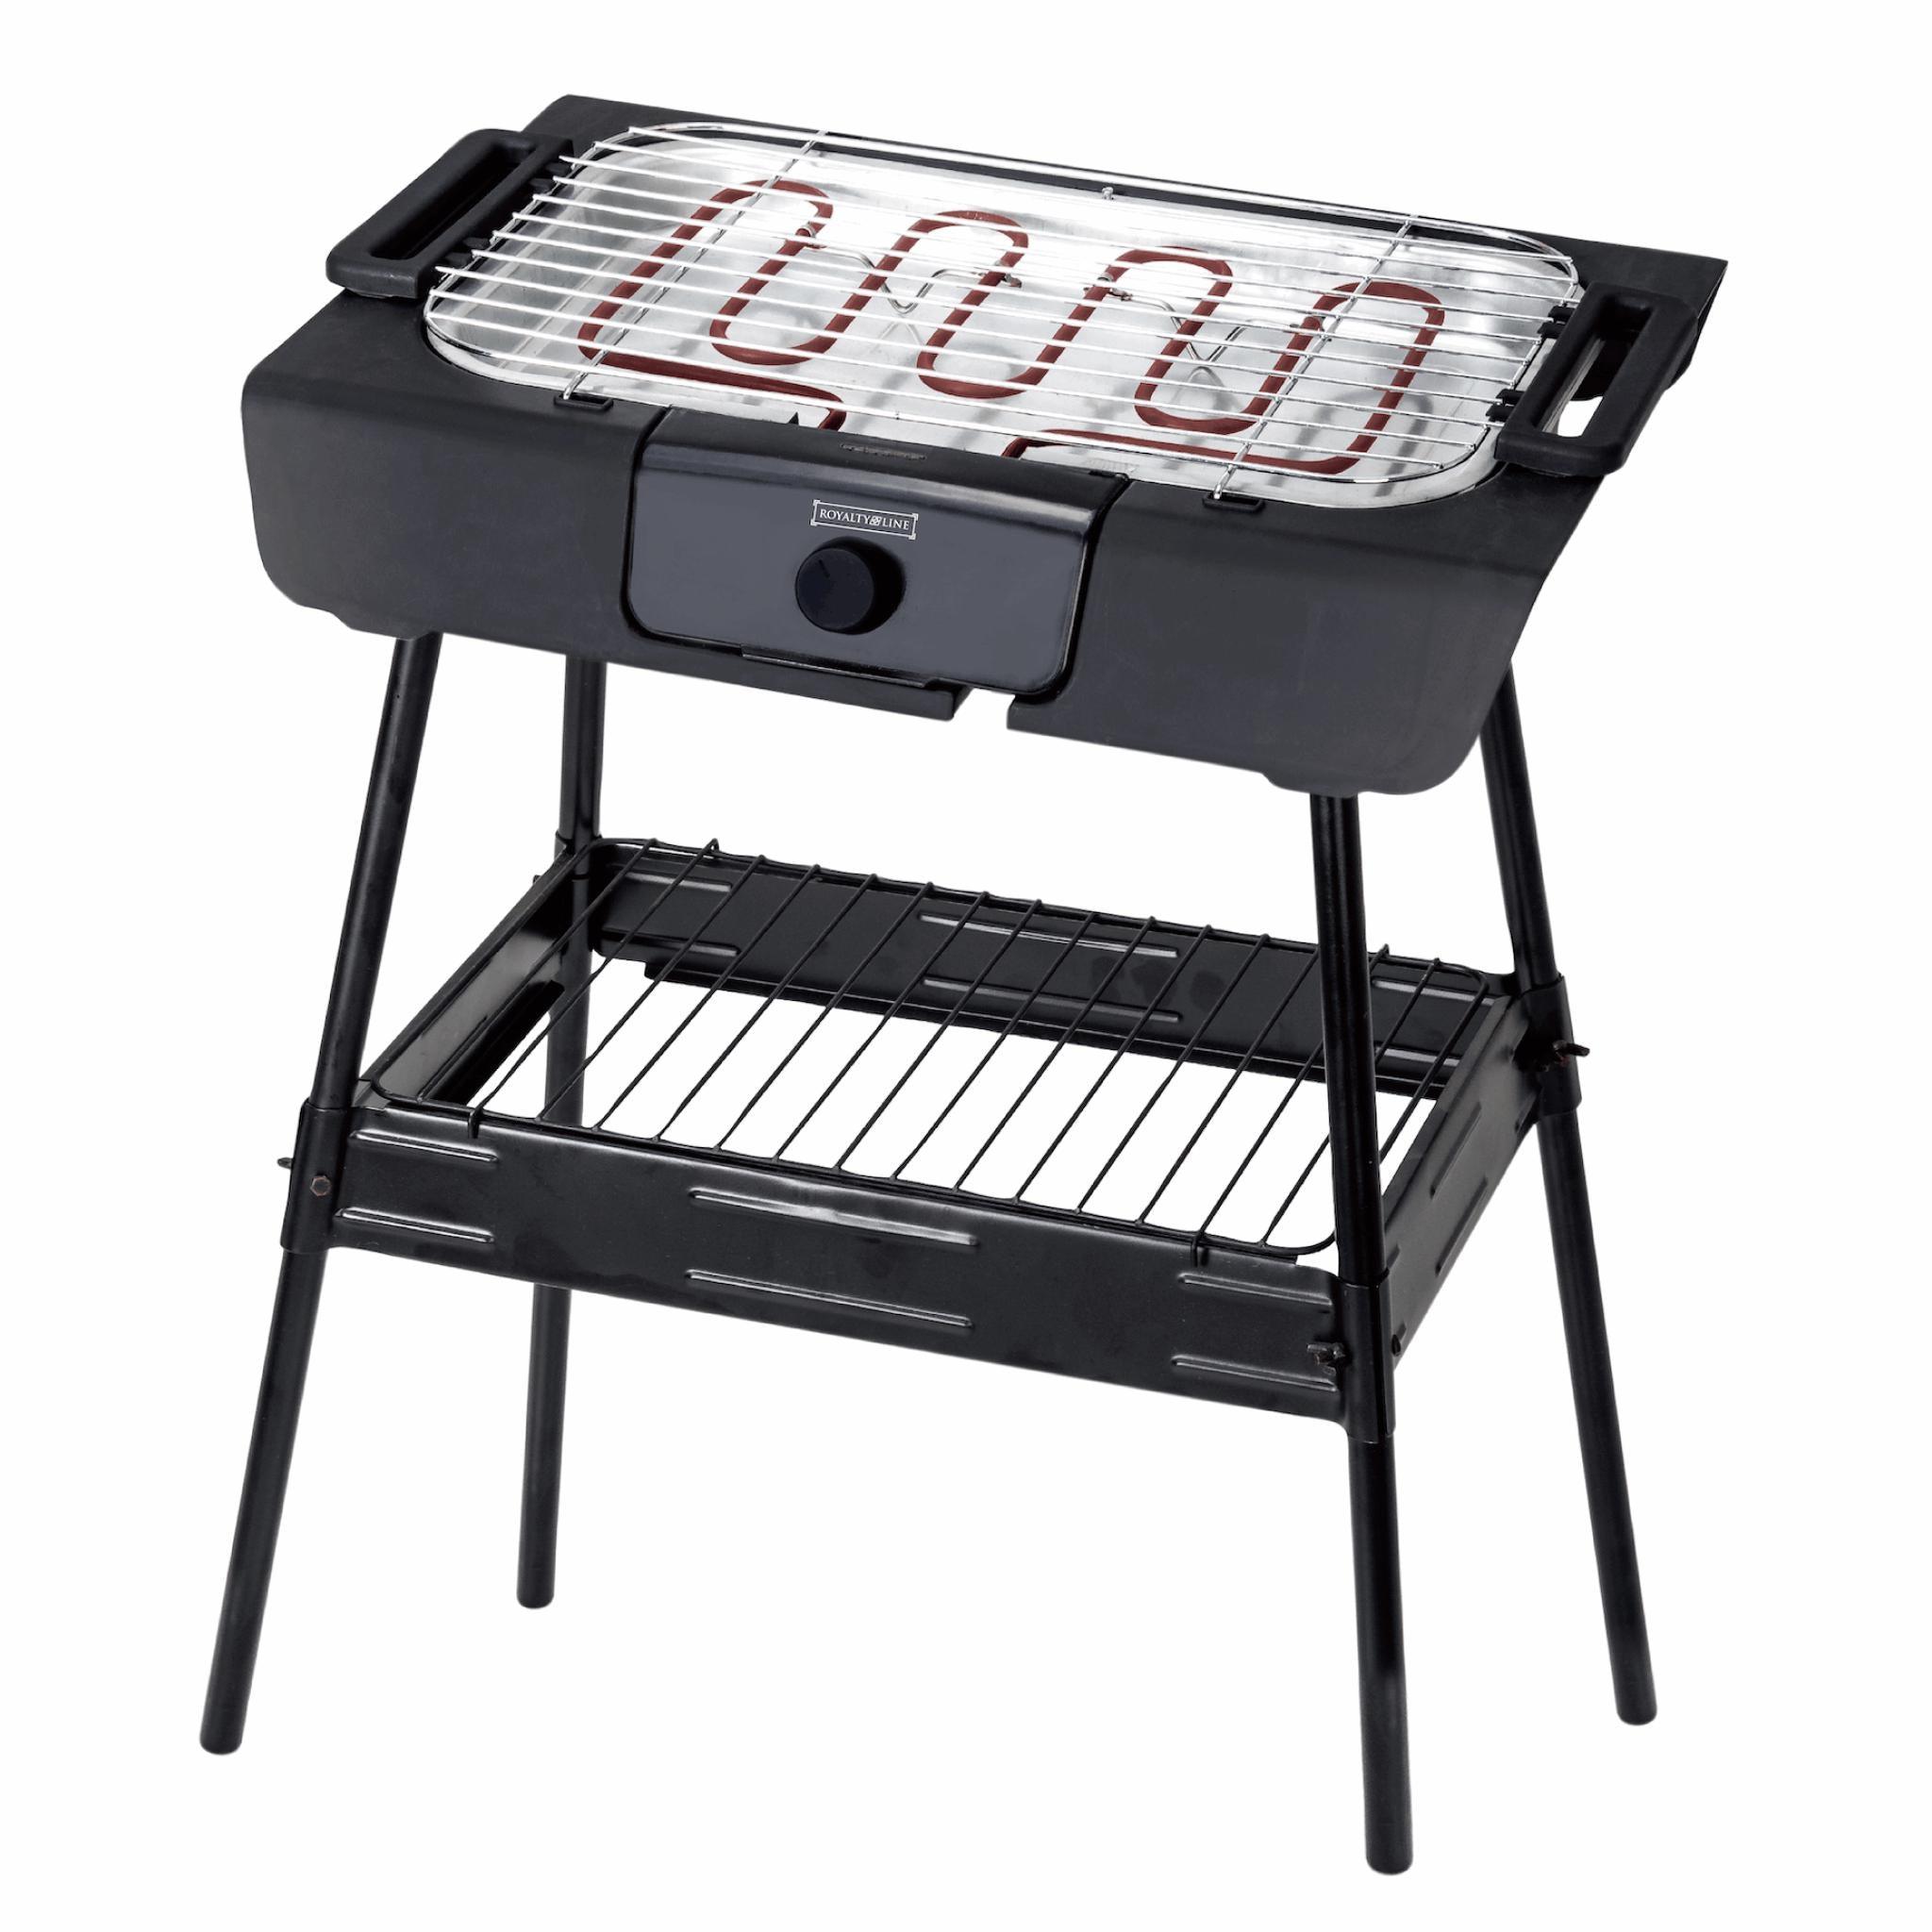 Cecotec PerfectCountry BBQ 2000W Electric Barbecue Stainless Steel Aluminum  - NAcloset